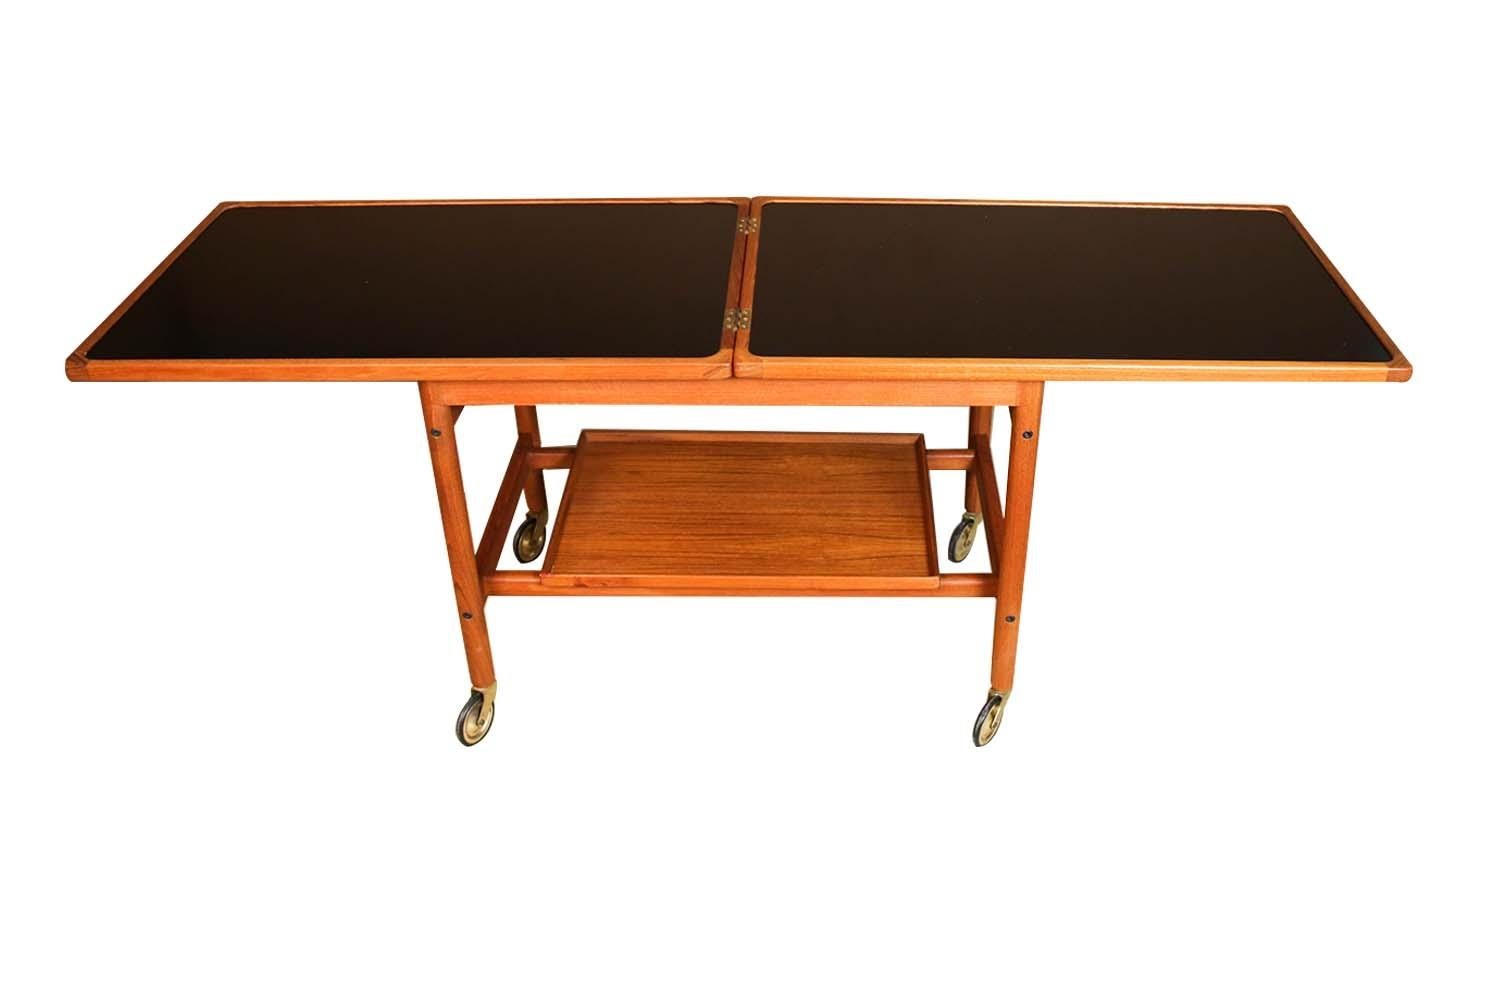 An exceptional Mid-Century Modern serving bar cart by designer Kurt Ostervig for Jason Mobler in Denmark, circa 1960s. Beautifully crafted from teak, this cleverly designed piece features a sliding upper shelf and removable lower tray. The beautiful